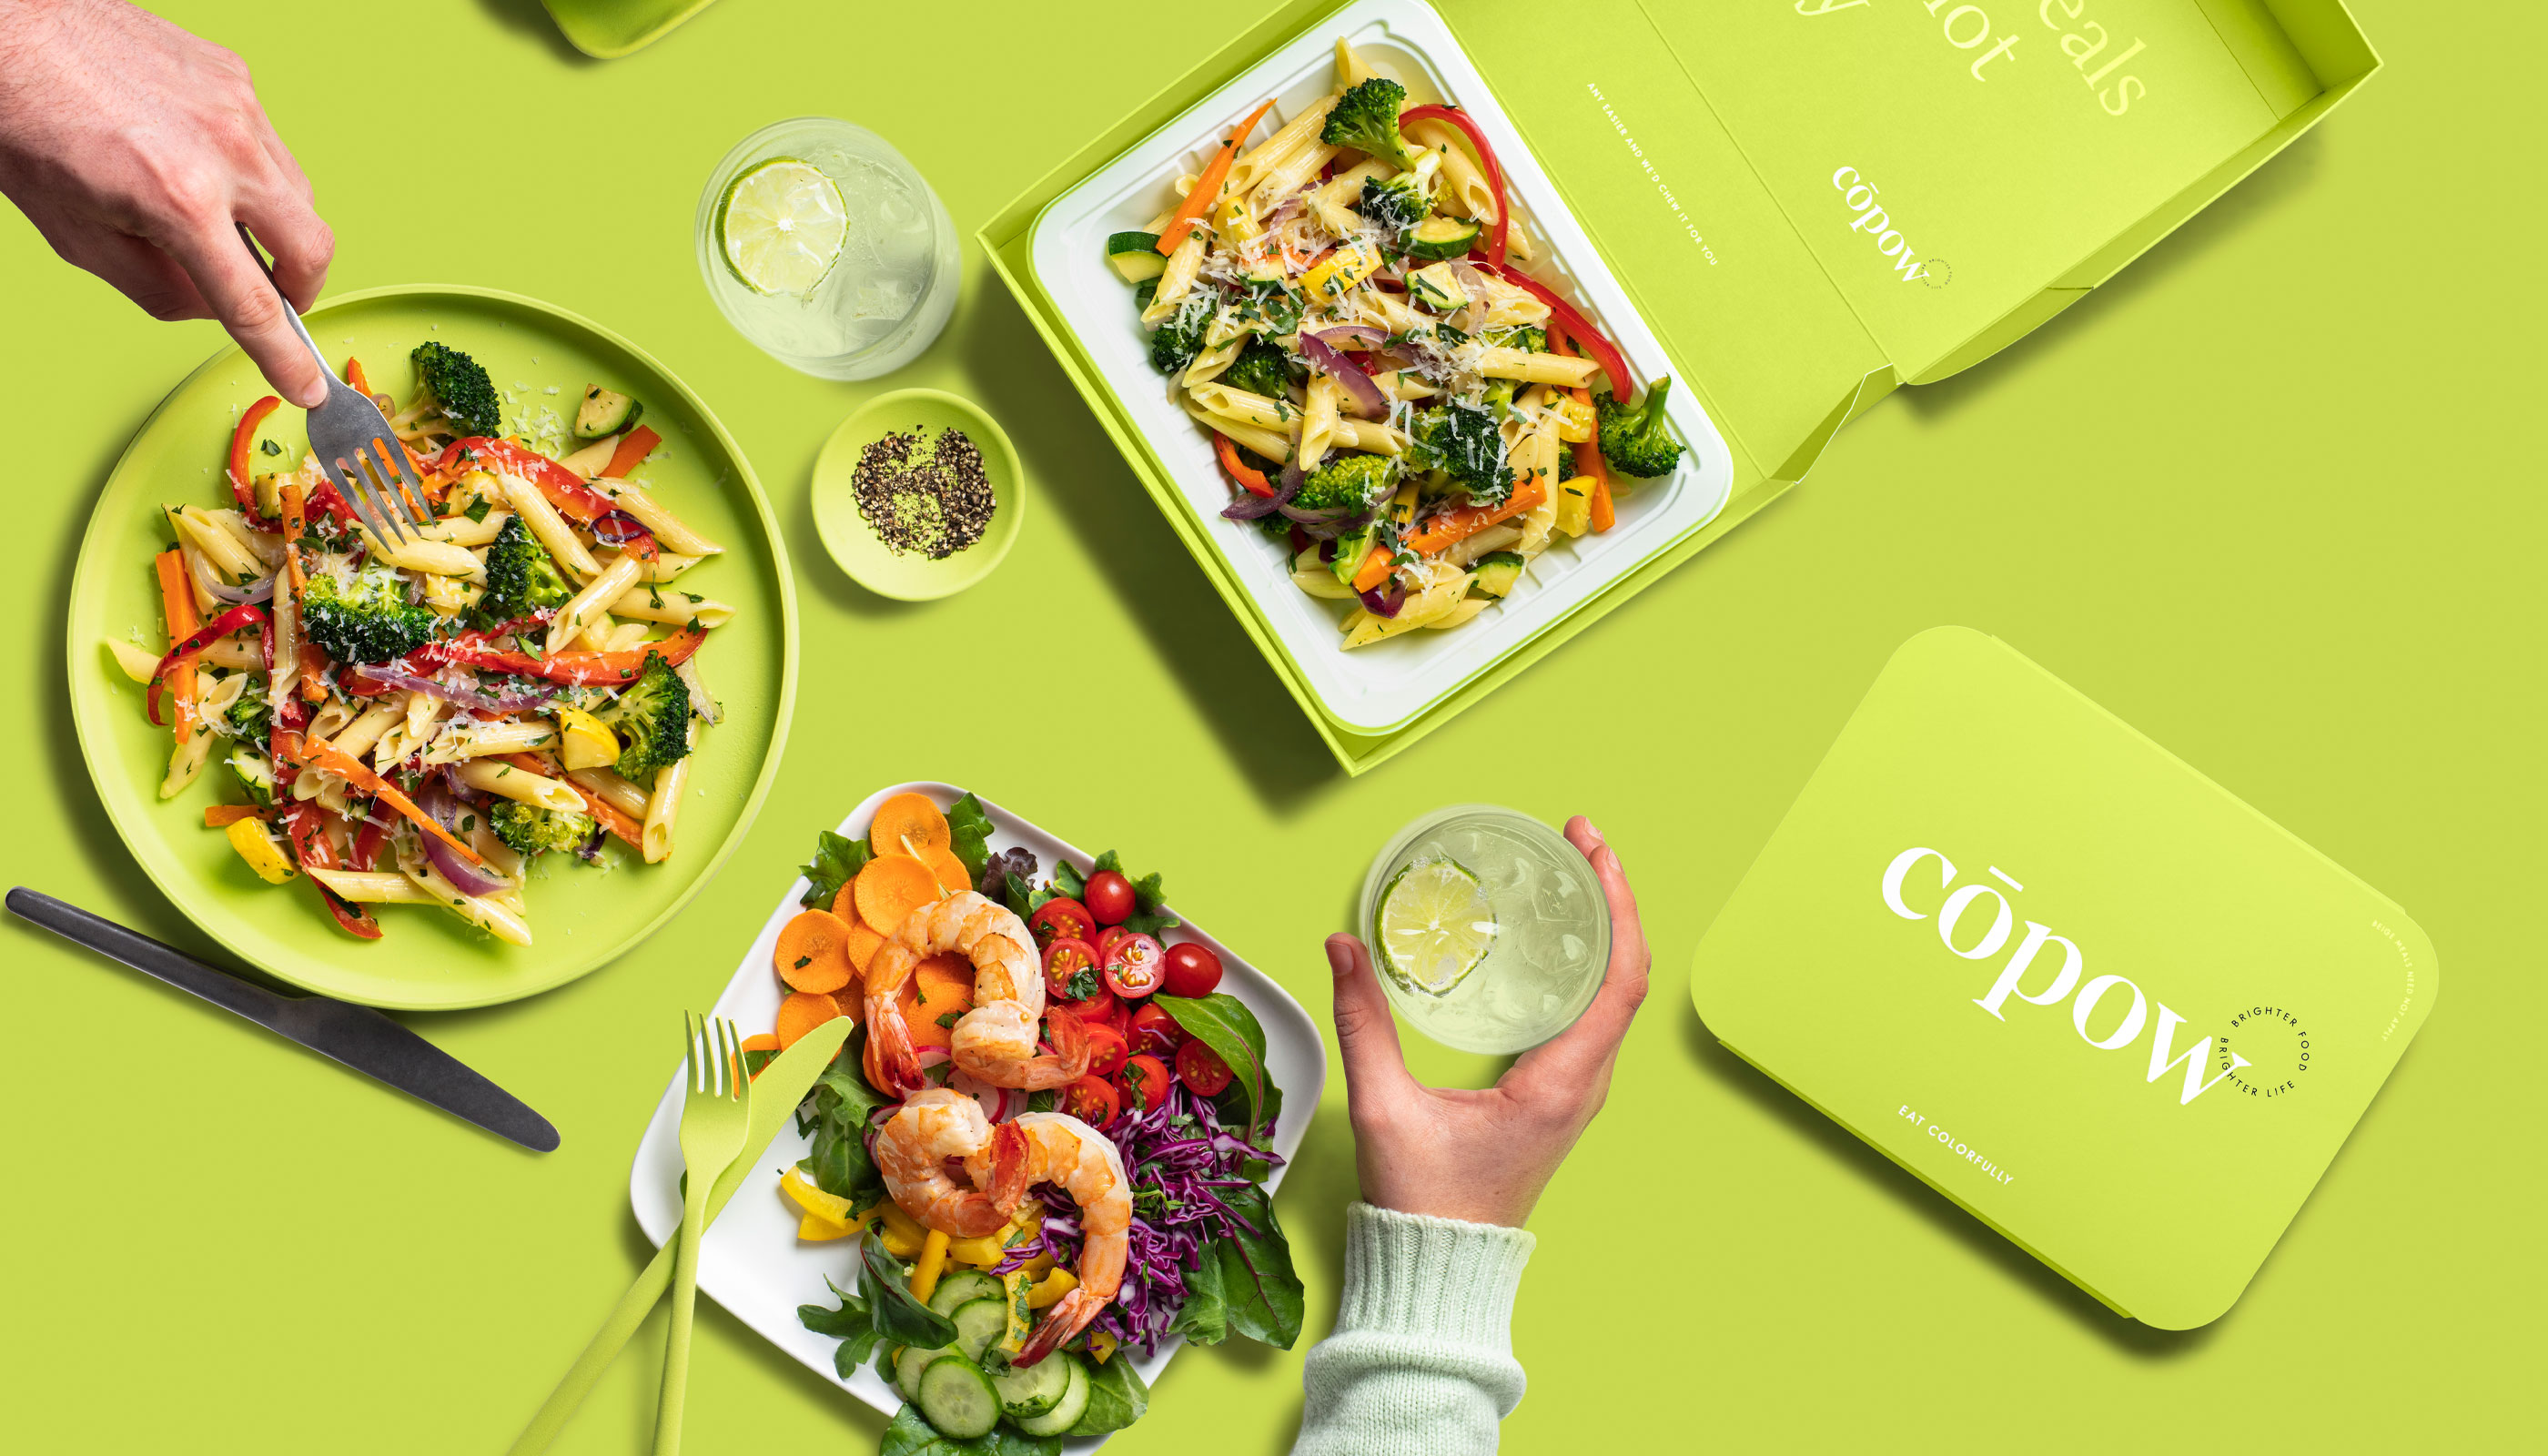 Launching The World’s Most Colorful Meal Delivery Branding and Packaging Design